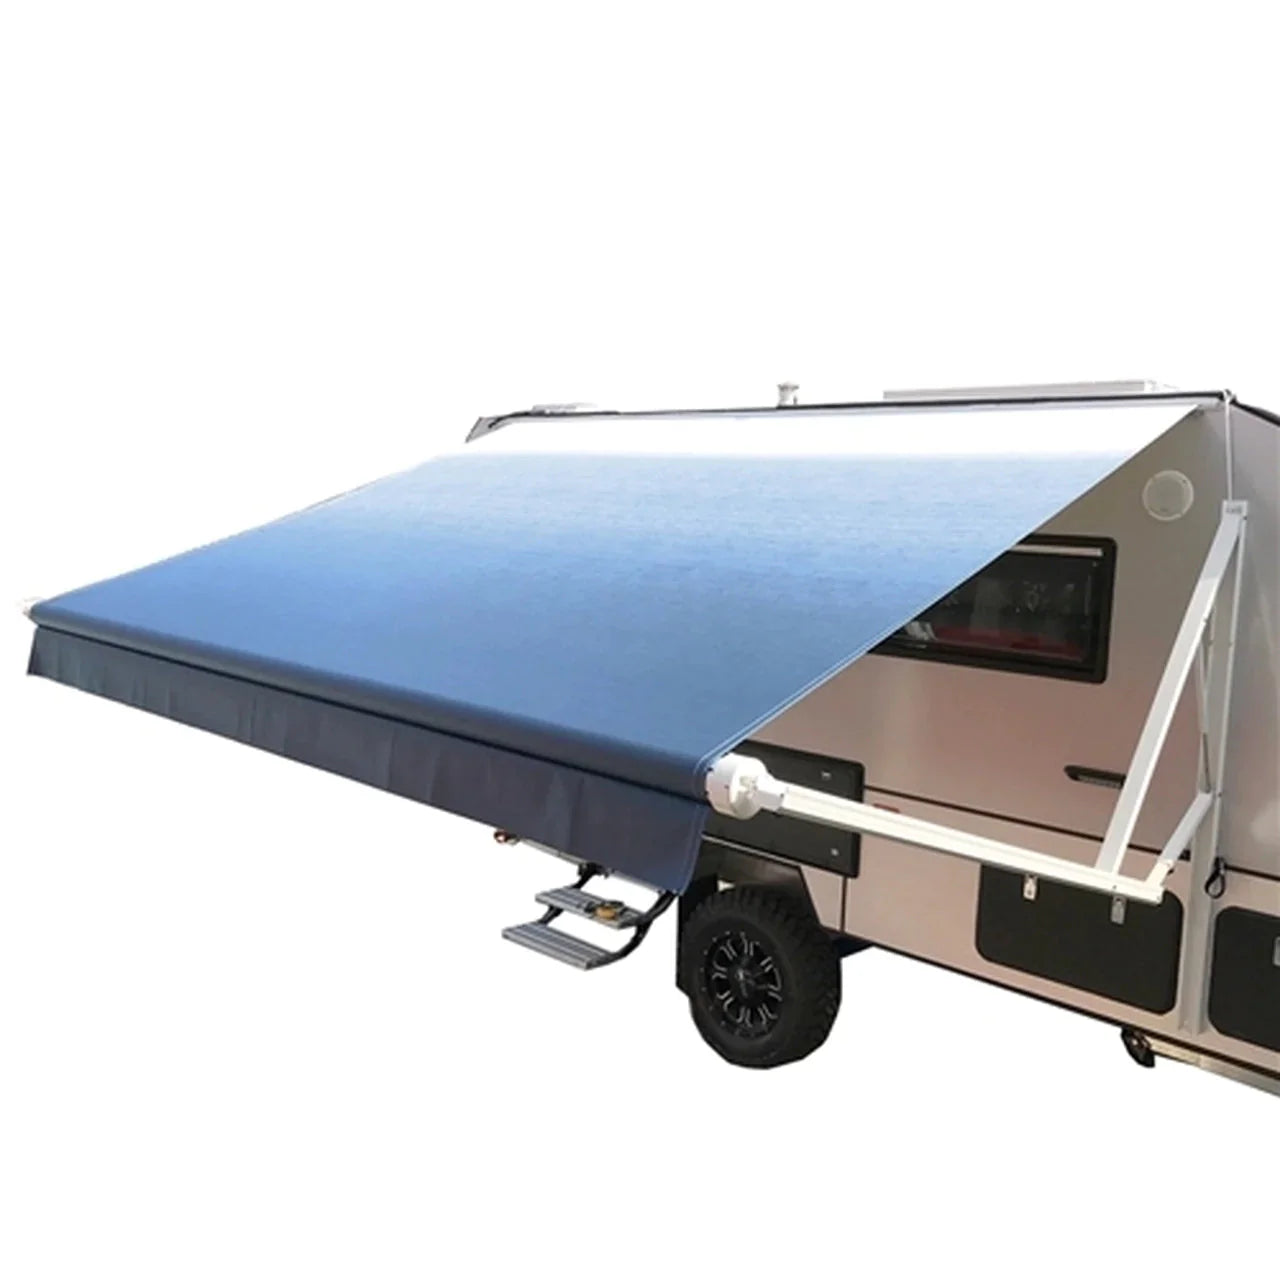 Aleko RV Awning Fabric Replacement - 16 X 8 ft (4.9 x 2.4 m)